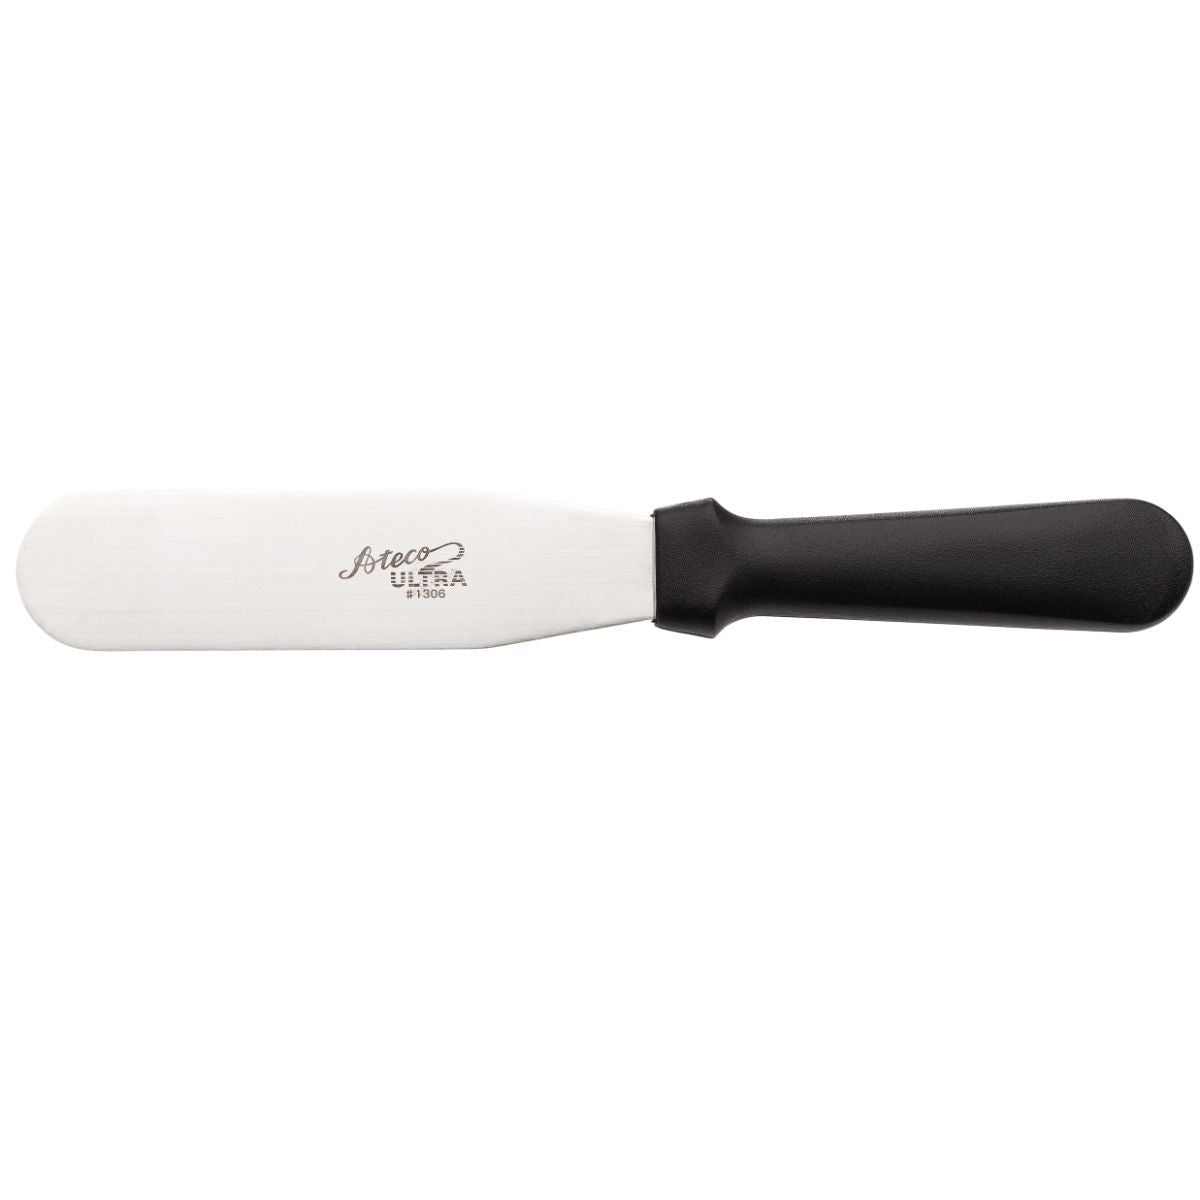 Choice 4 1/2 Blade Straight Baking / Icing Spatula with Wood Handle